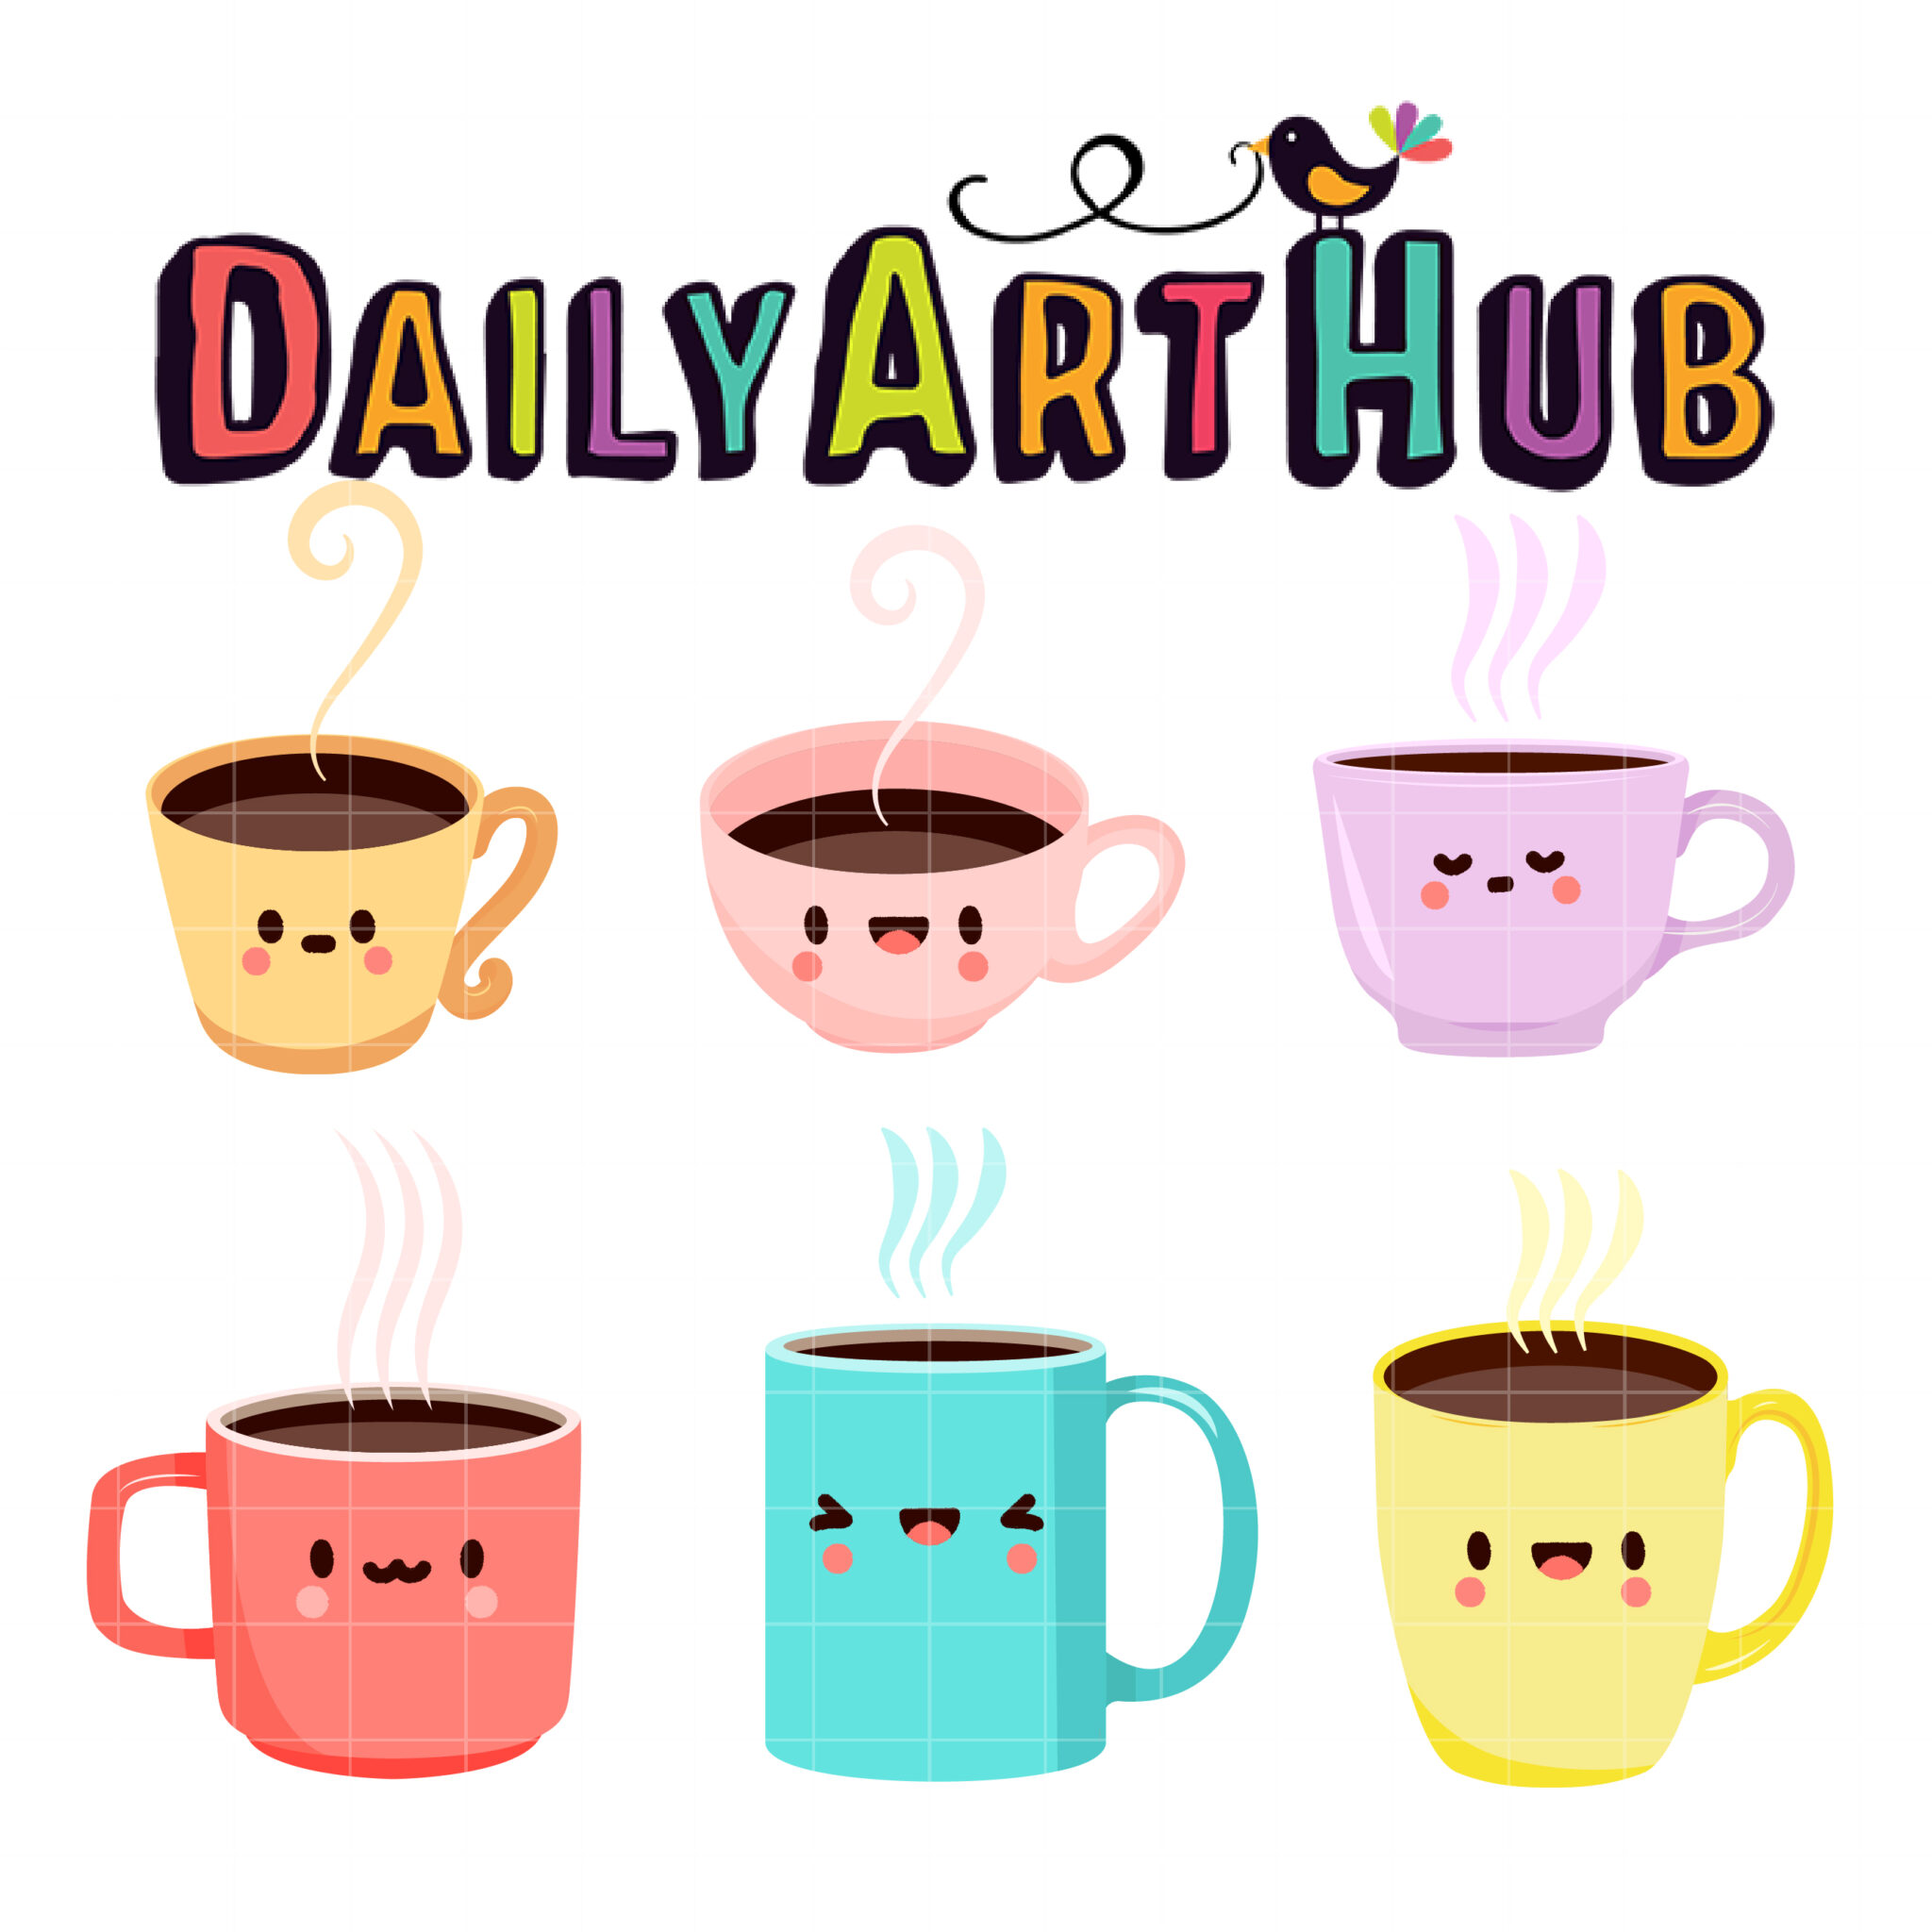 https://www.dailyarthub.com/wp-content/uploads/2021/03/Cute-Coffee-and-Tea-Cup-scaled.jpg